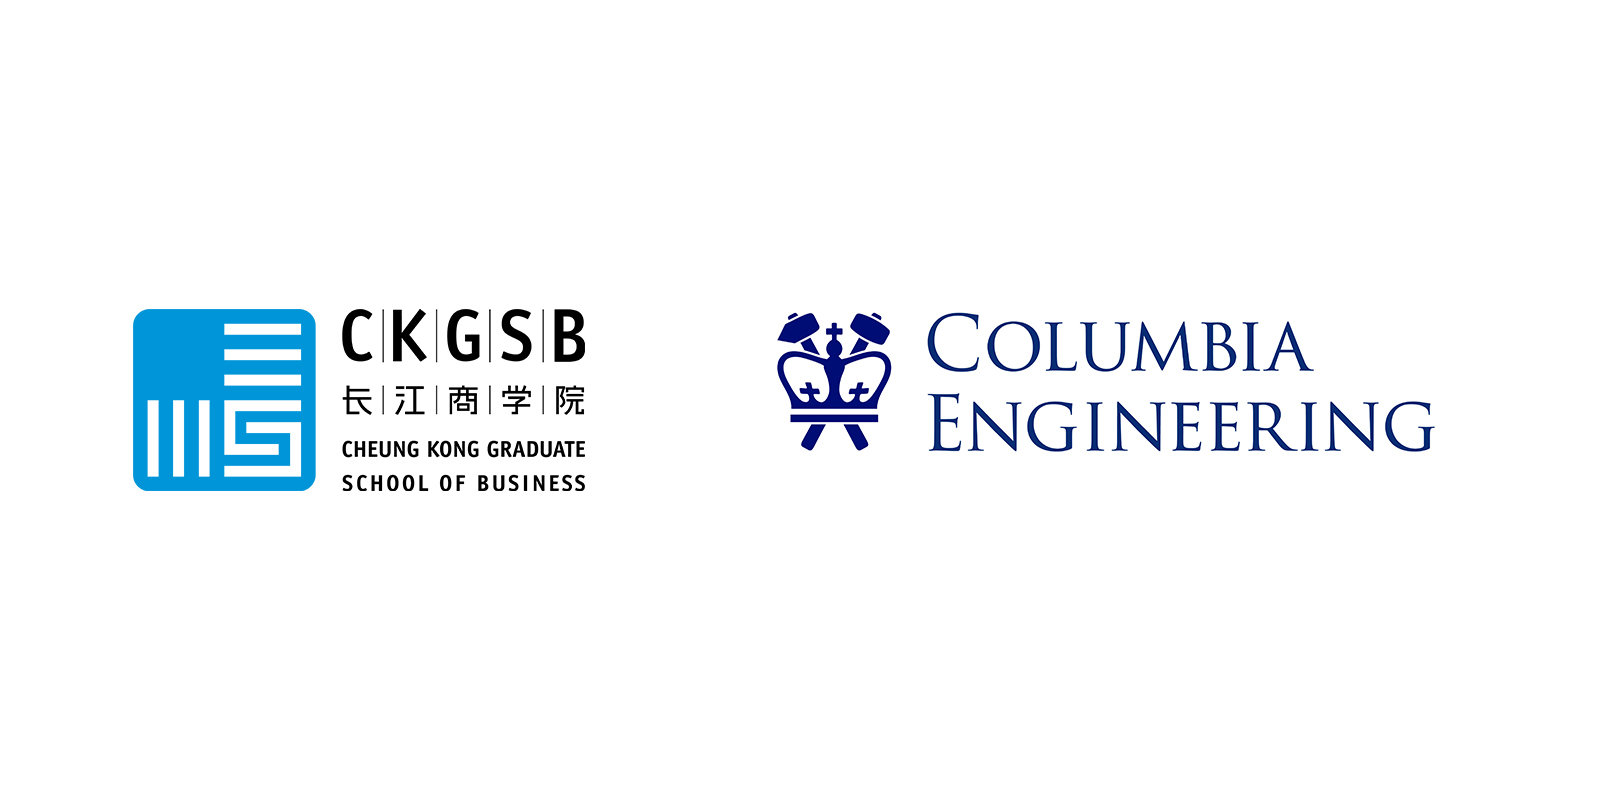 The New Pivotal Program by CKGSB and Columbia Engineering on Digital Innovation 01 - CKGSB